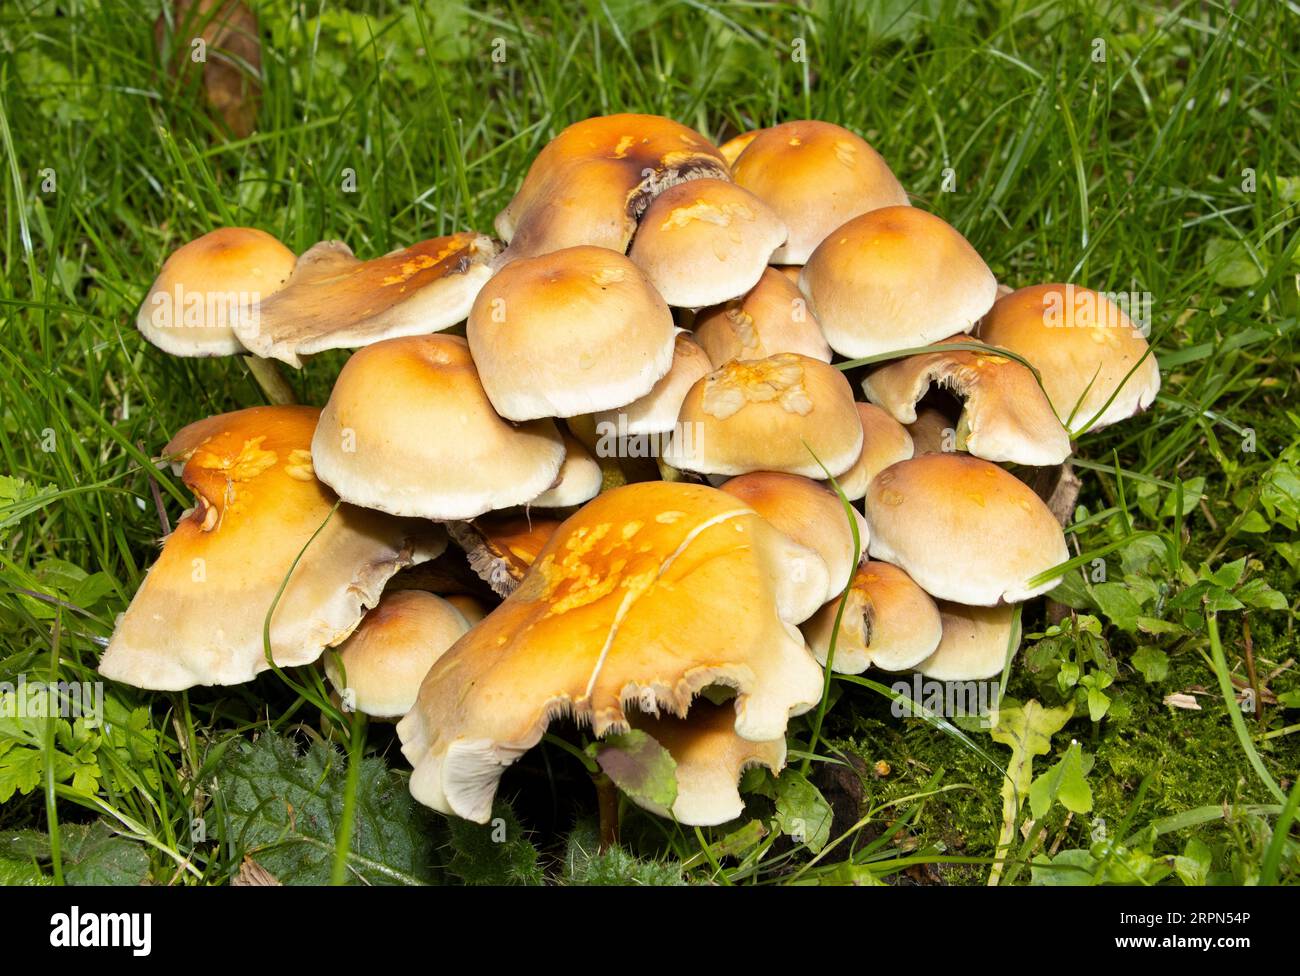 Sulphur Tuft is an extremely common fungus that forms clumps on decaying wood. They are common in deciduous and conifer woodlands in the UK. Stock Photo